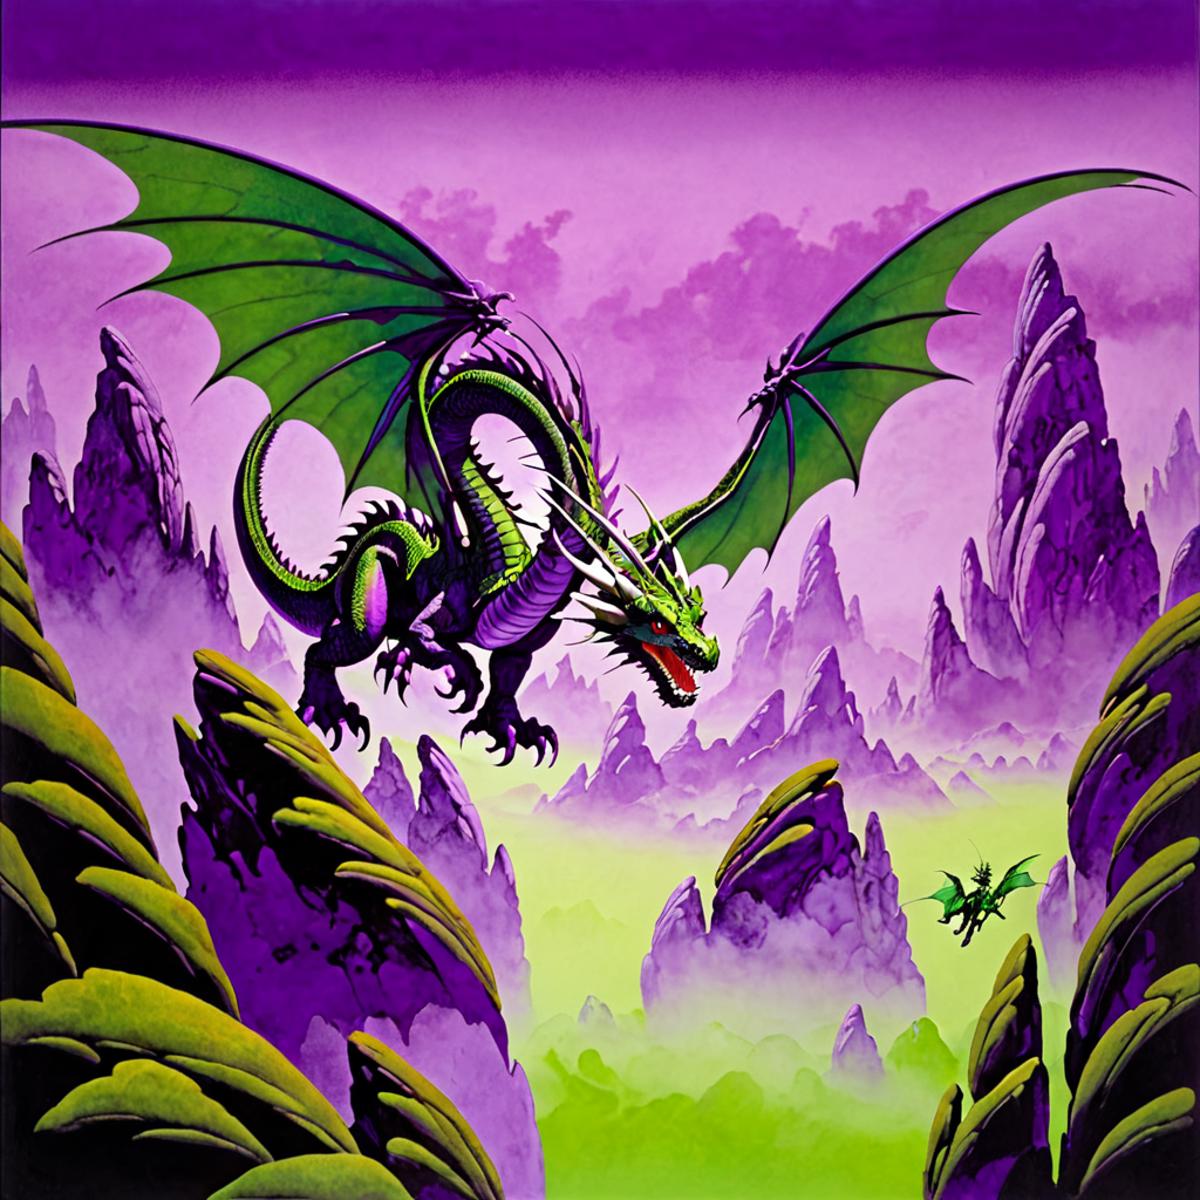 <lora:Roger_Dean_Style:1> roger dean style a beautiful landscape with purple sky, green mountains, dragon flying